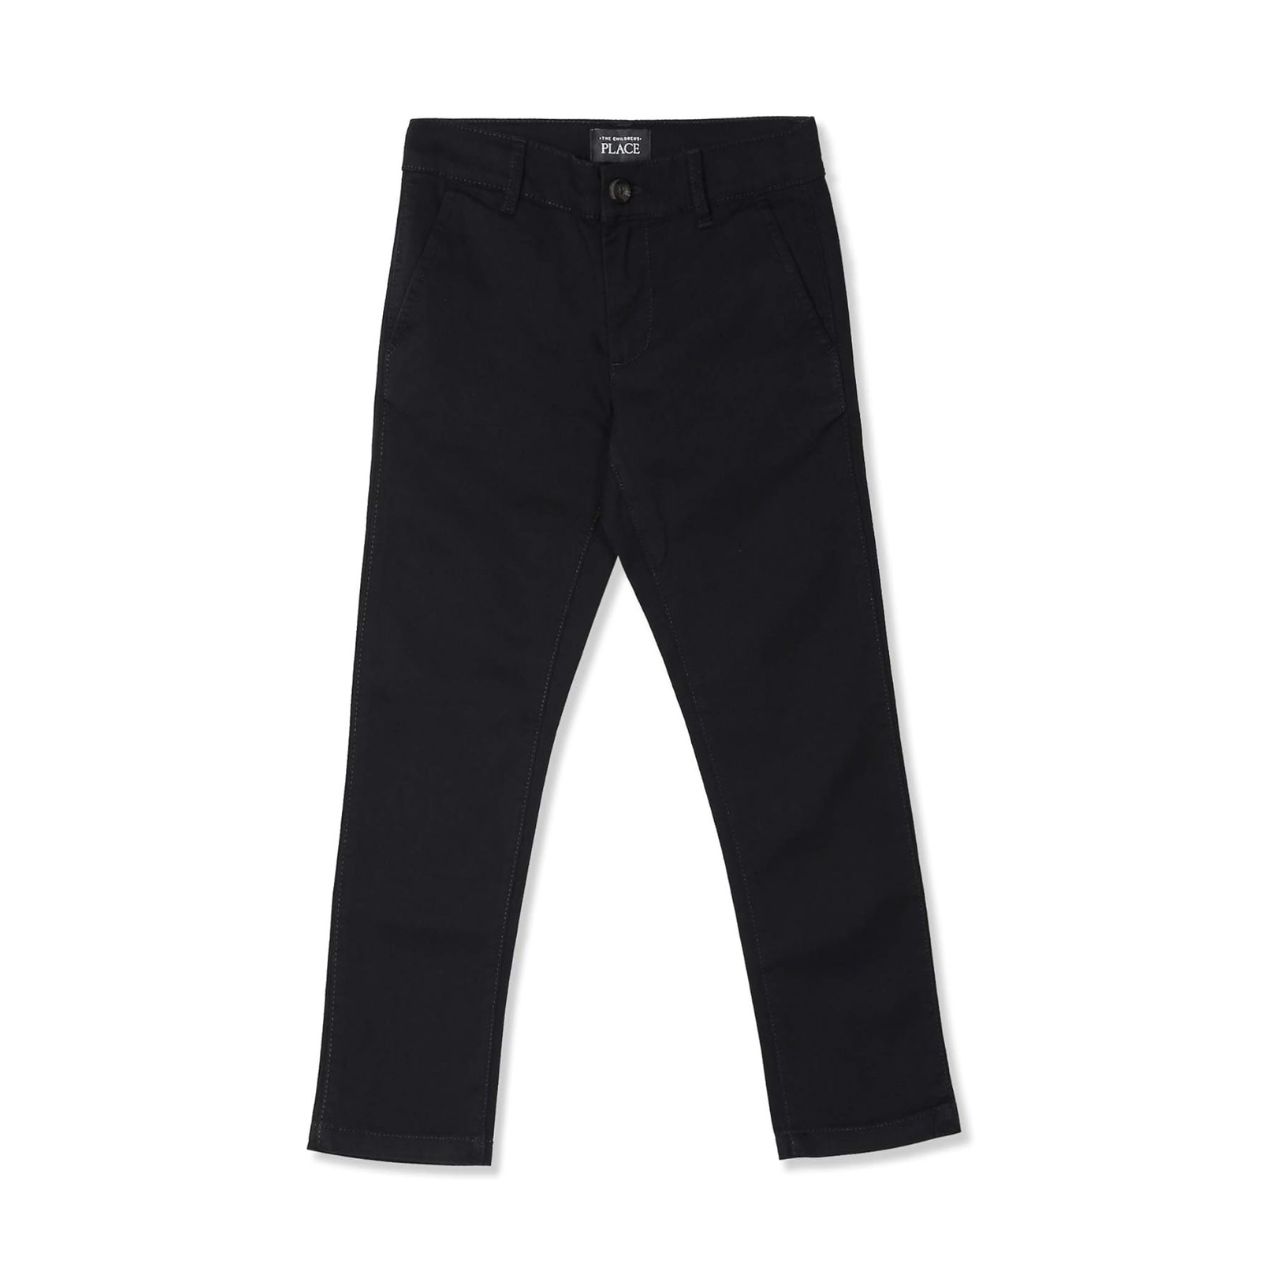 The Children’s Place Boys Stretch Skinny Chino Pants